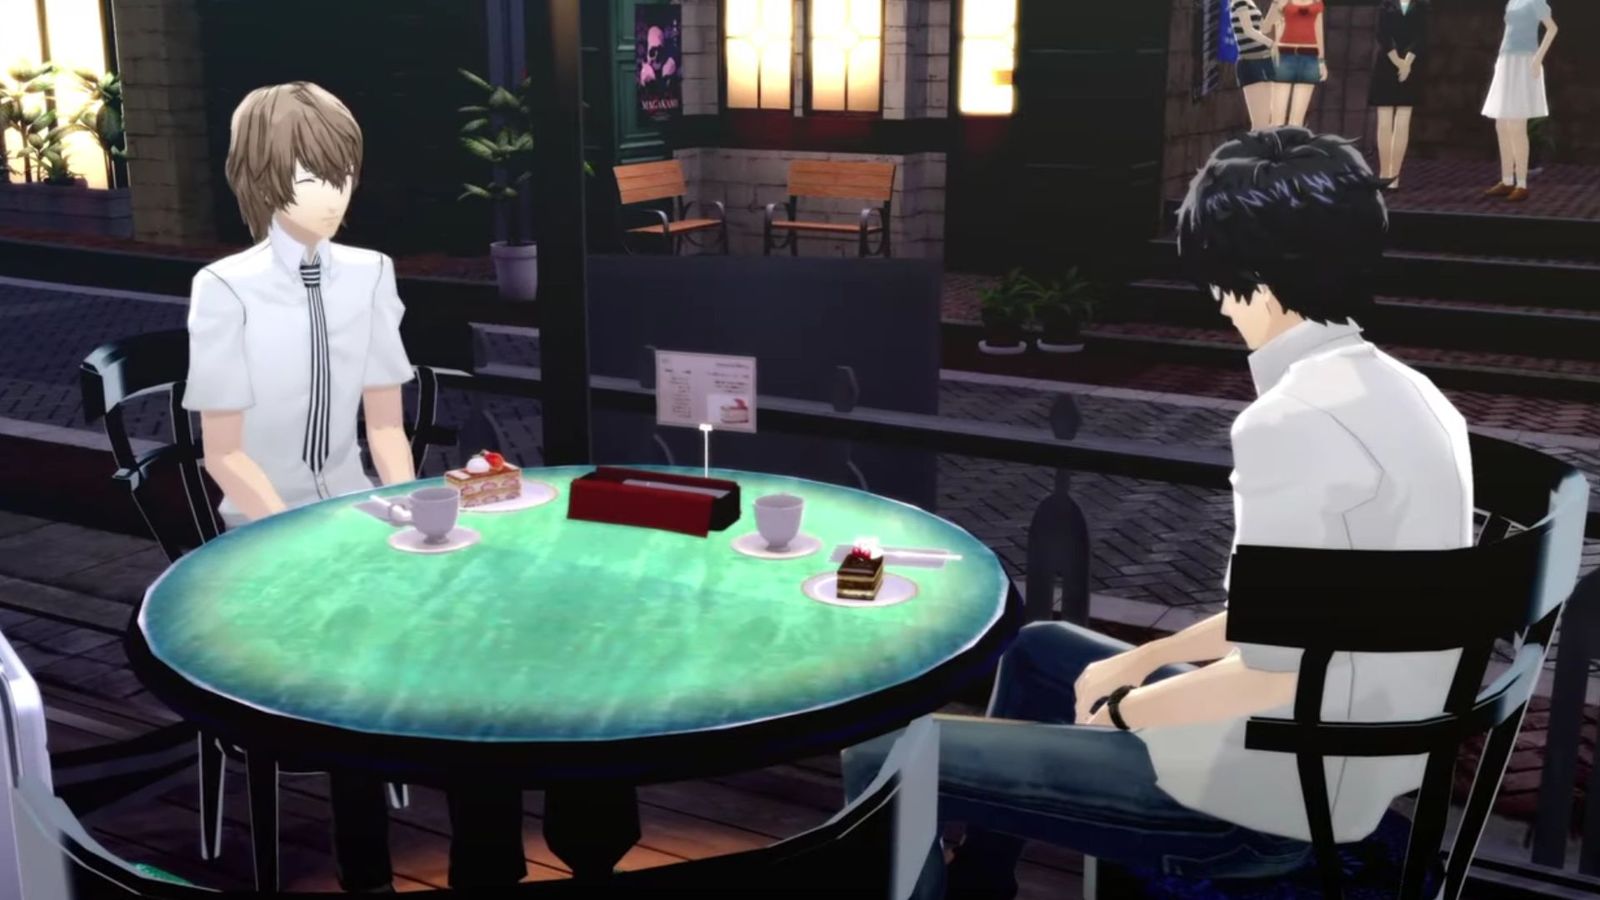 Akechi and Joker sitting at a cafe in Persona 5 Royal